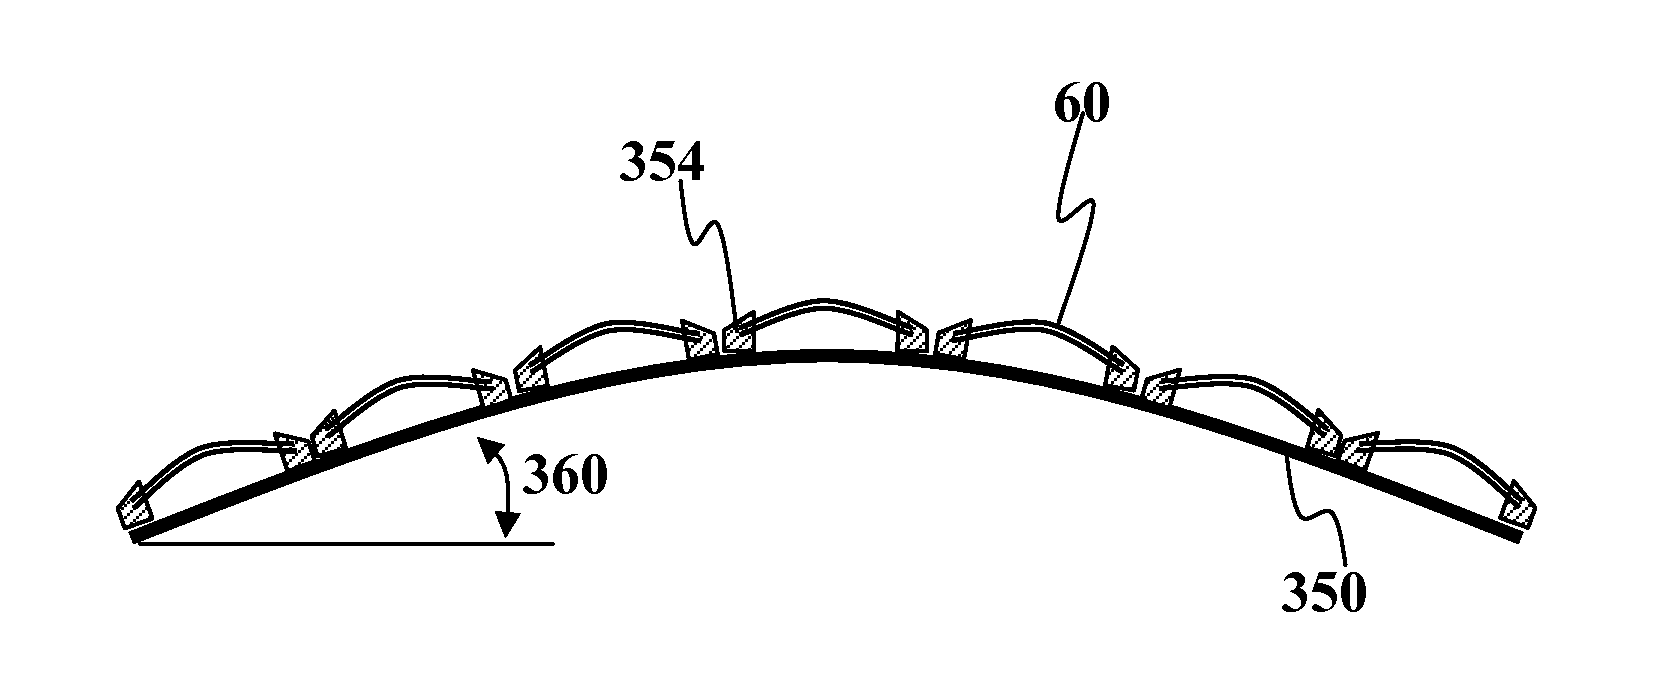 Compression or arched mounting of solar panels